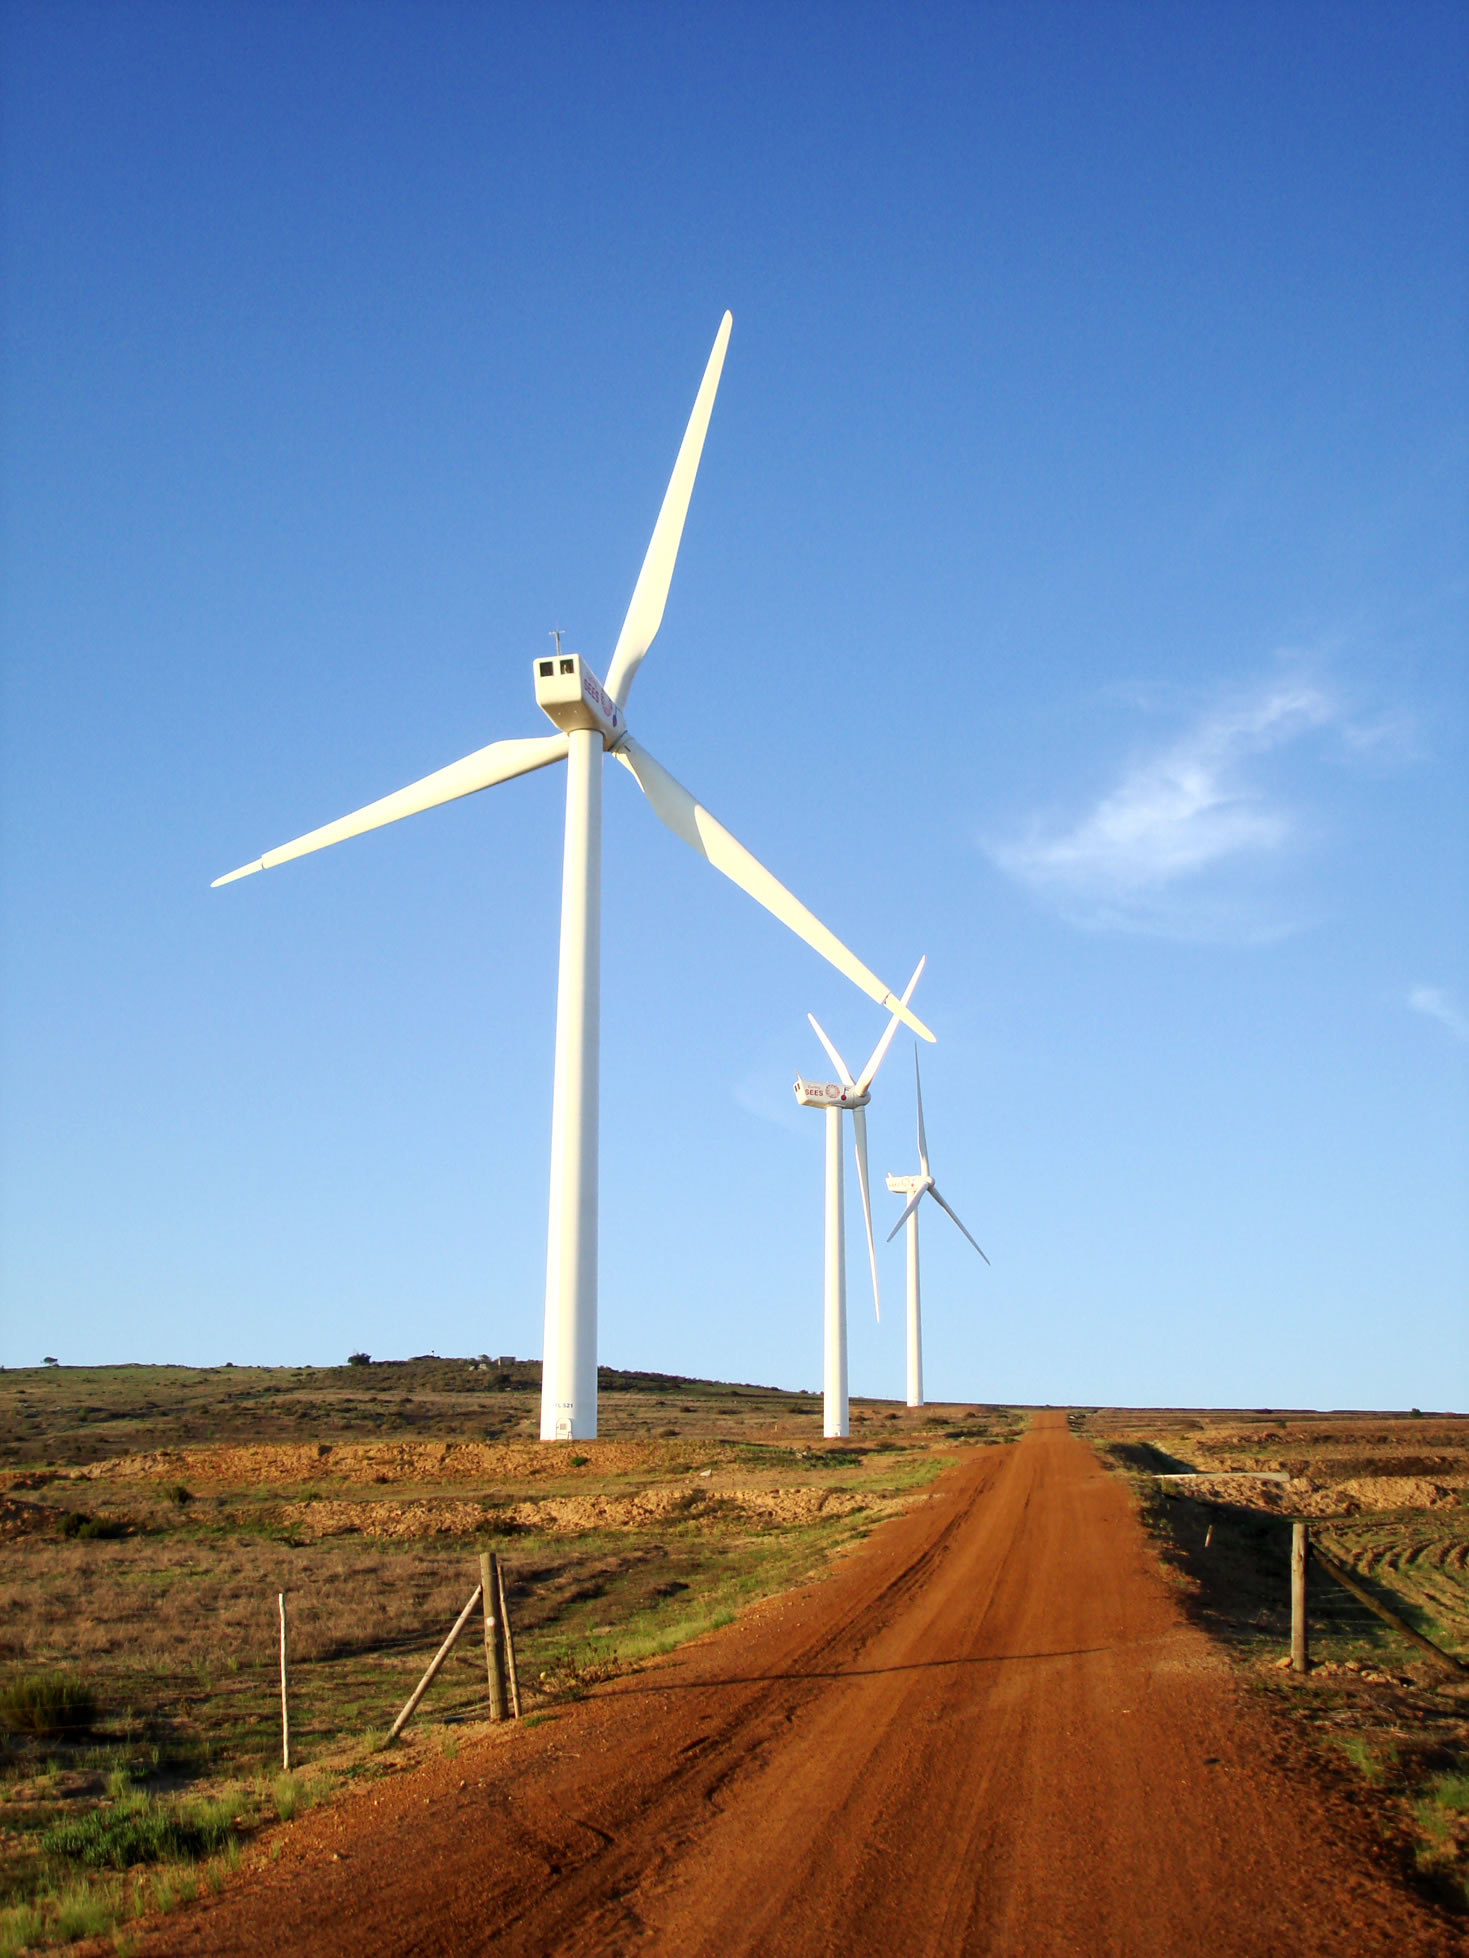  A wind farm in Cape Town, South Africa